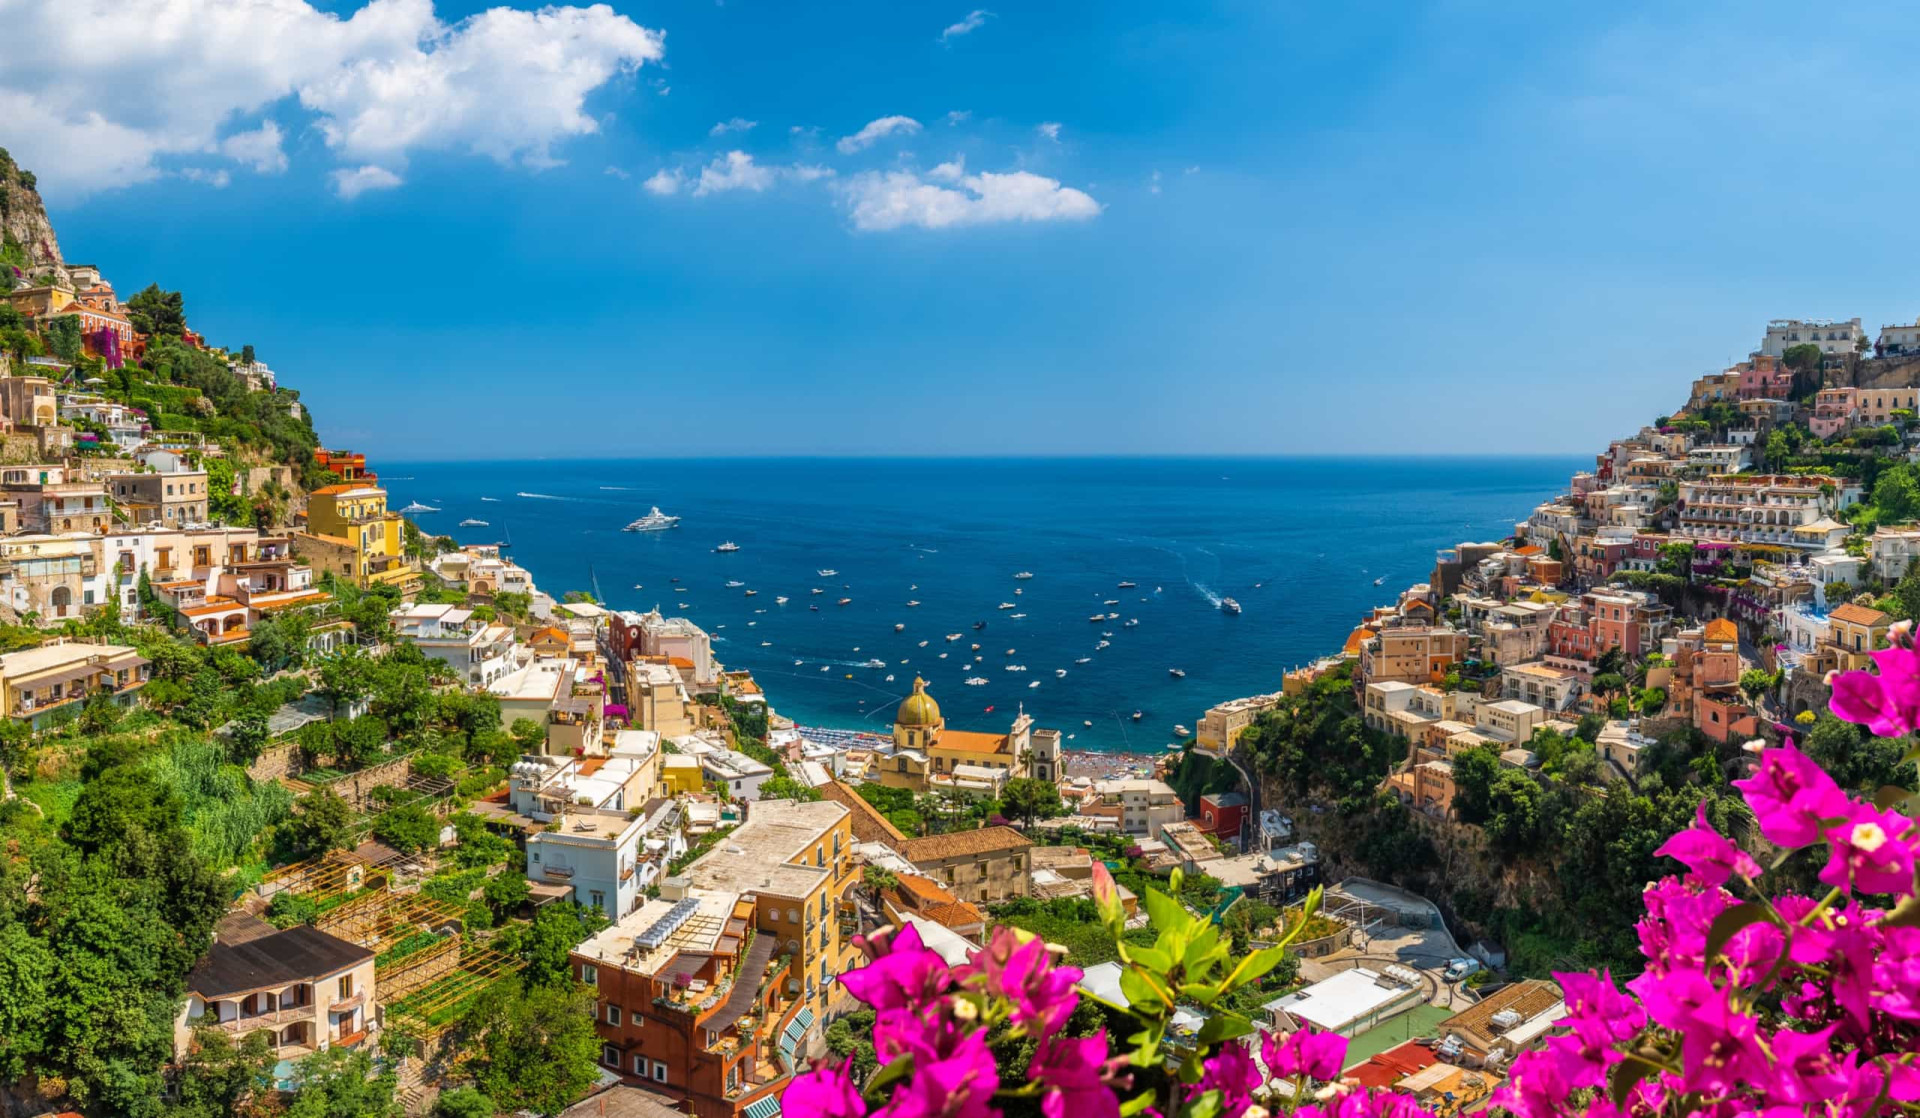 <p>Caressed by soft Mediterranean Sea breezes, charming Positano on Italy's Amalfi coast seduces the sense with its panorama of textures and colors.</p>